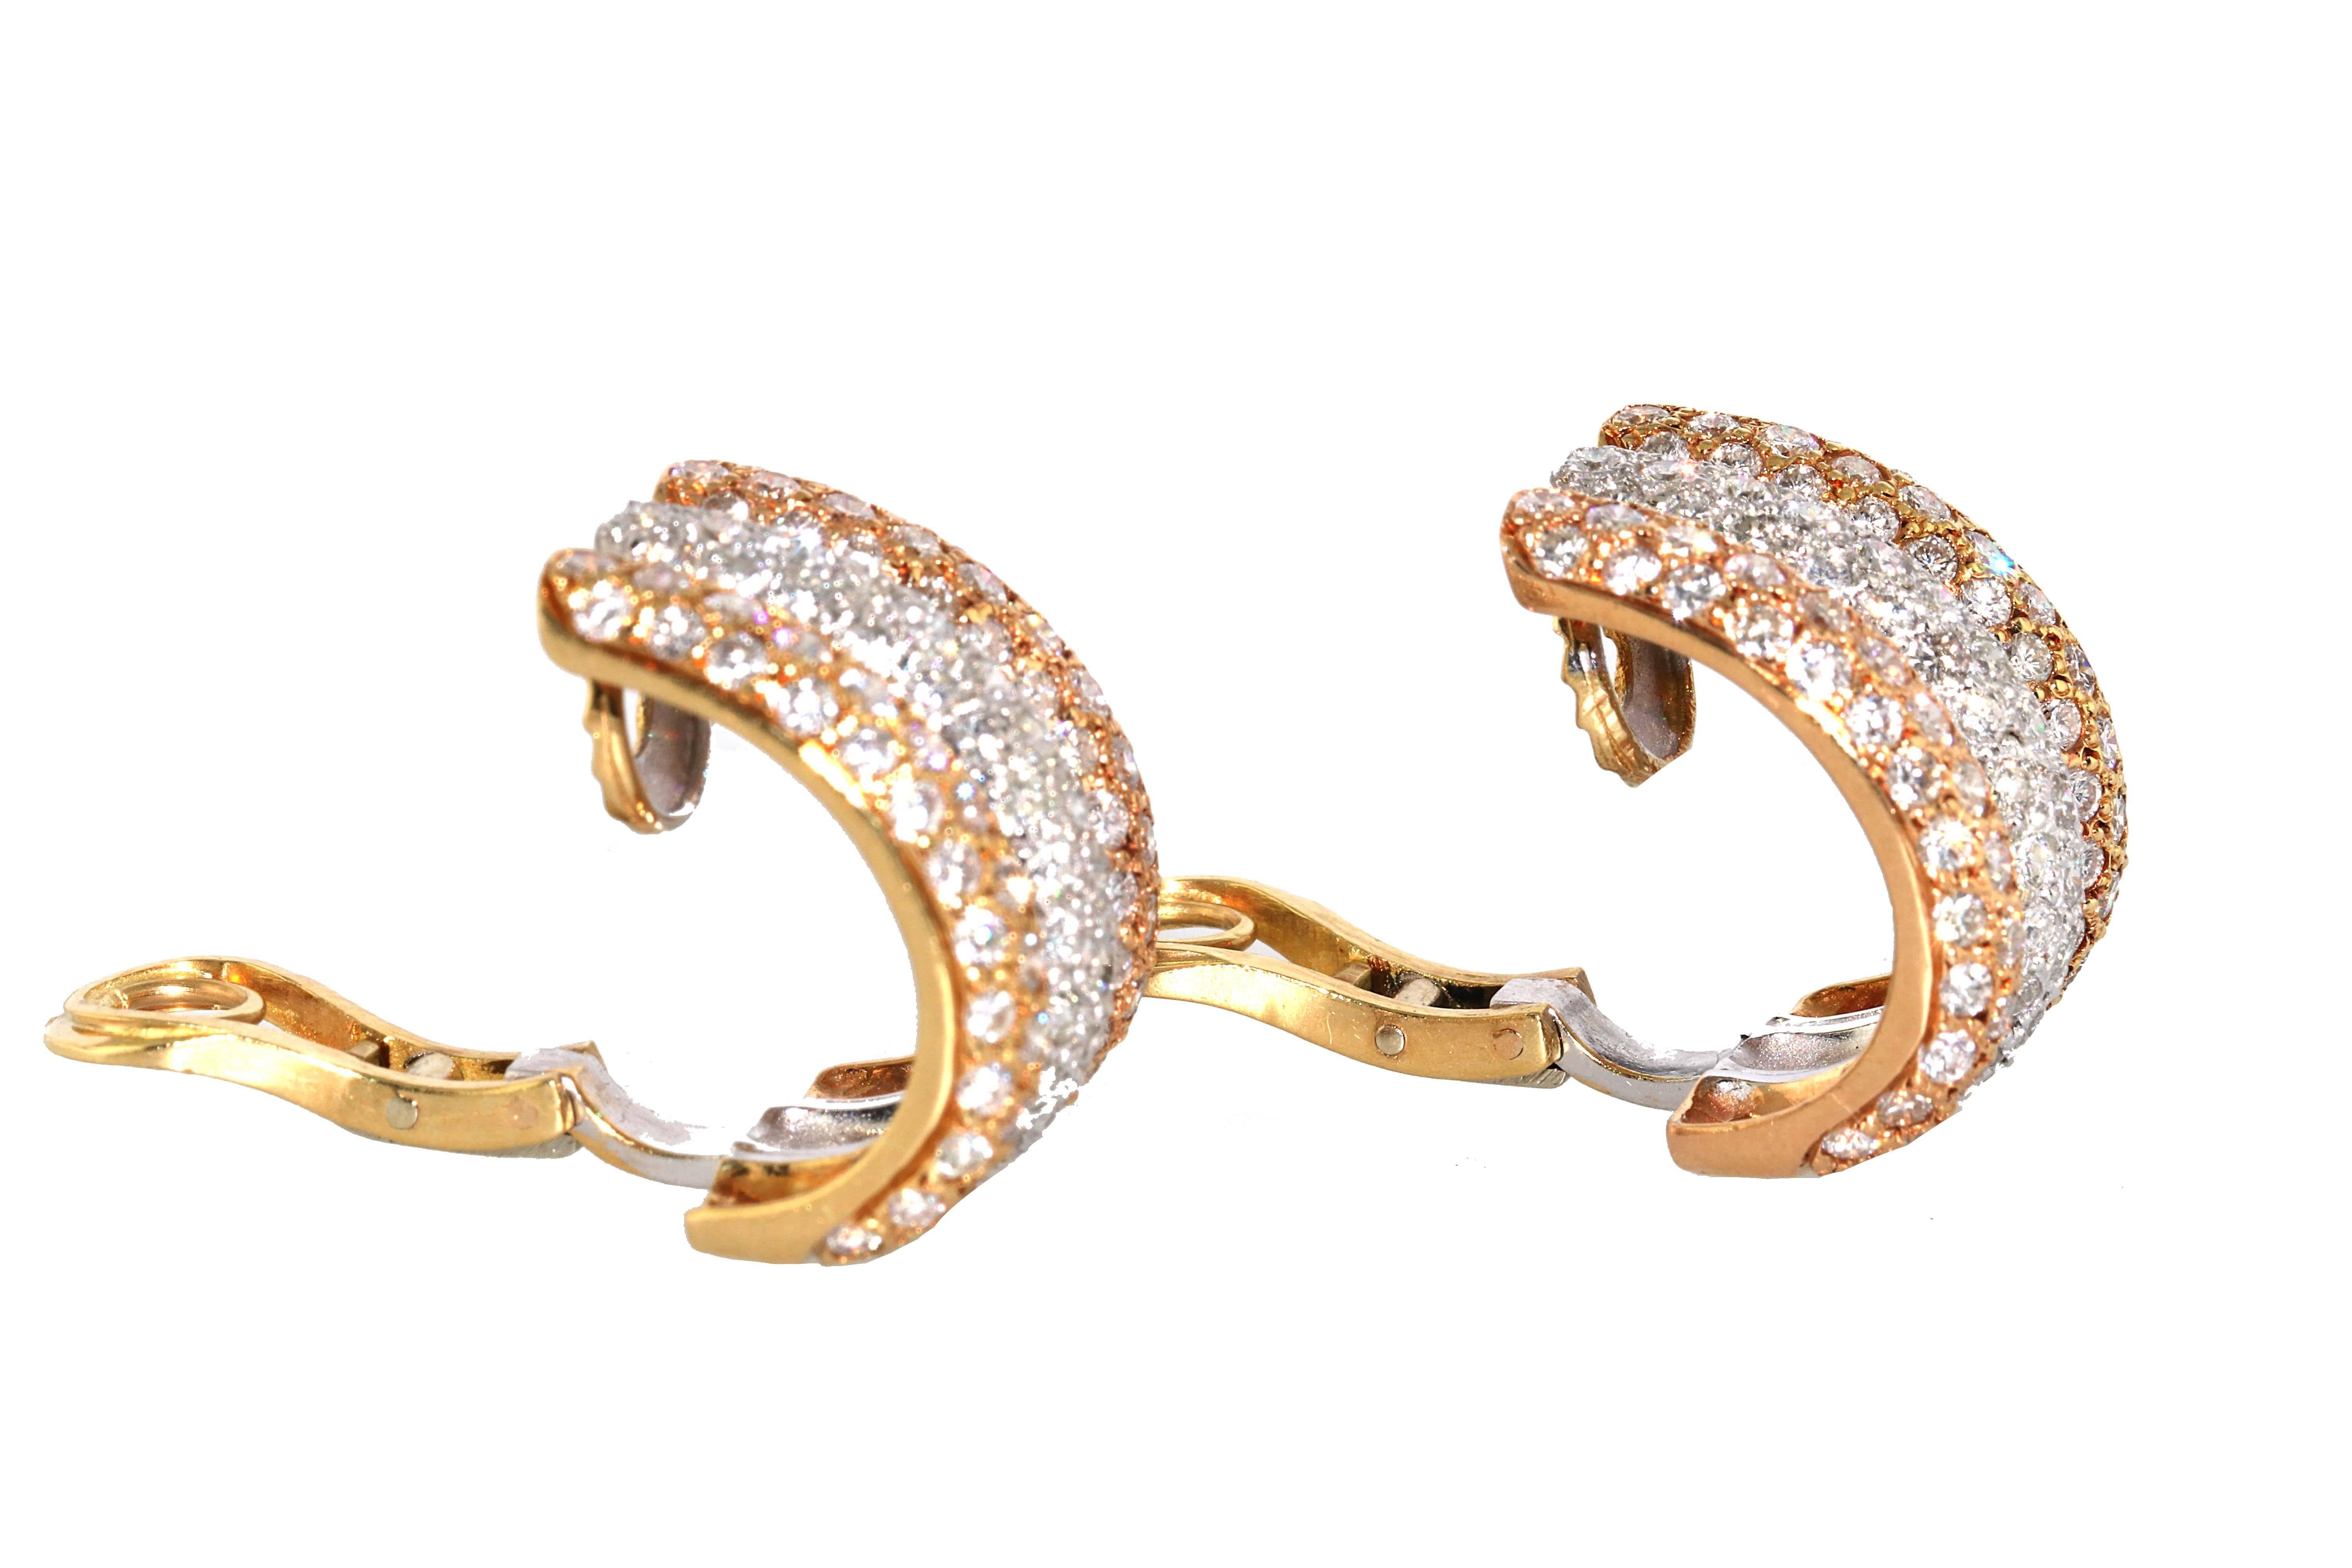 Gorgeous diamond huggie earrings with 3 colors of gold. White, yellow and rose gold adorned with round diamonds. 240 diamonds weighing an approximately 4.80 carats. 